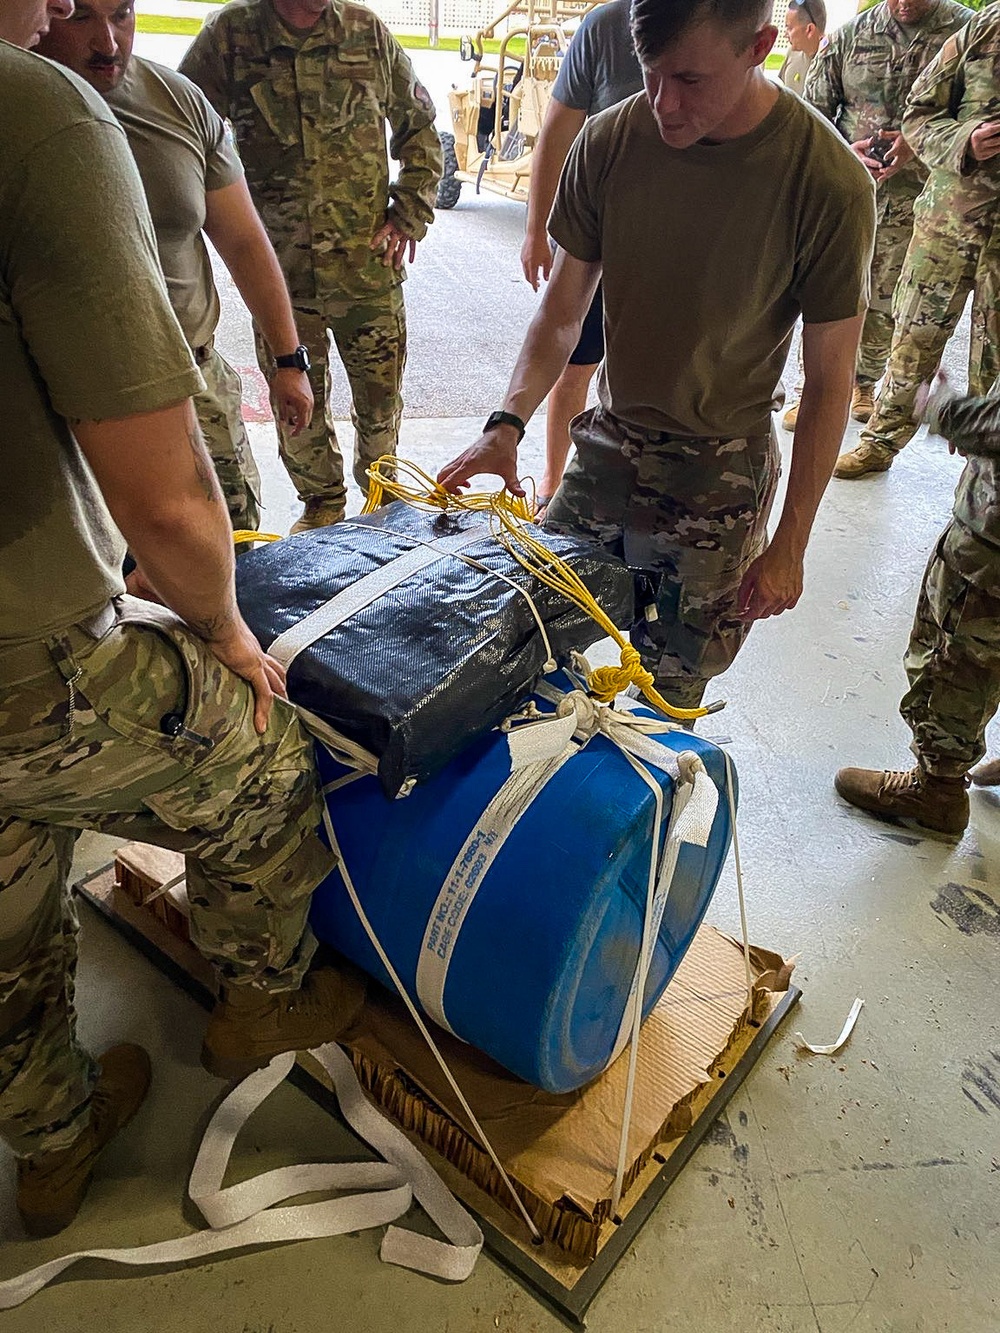 Parachute riggers with 1st SFG (A), 82nd Airborne, US Navy collaborate in building lifesaving apparatus